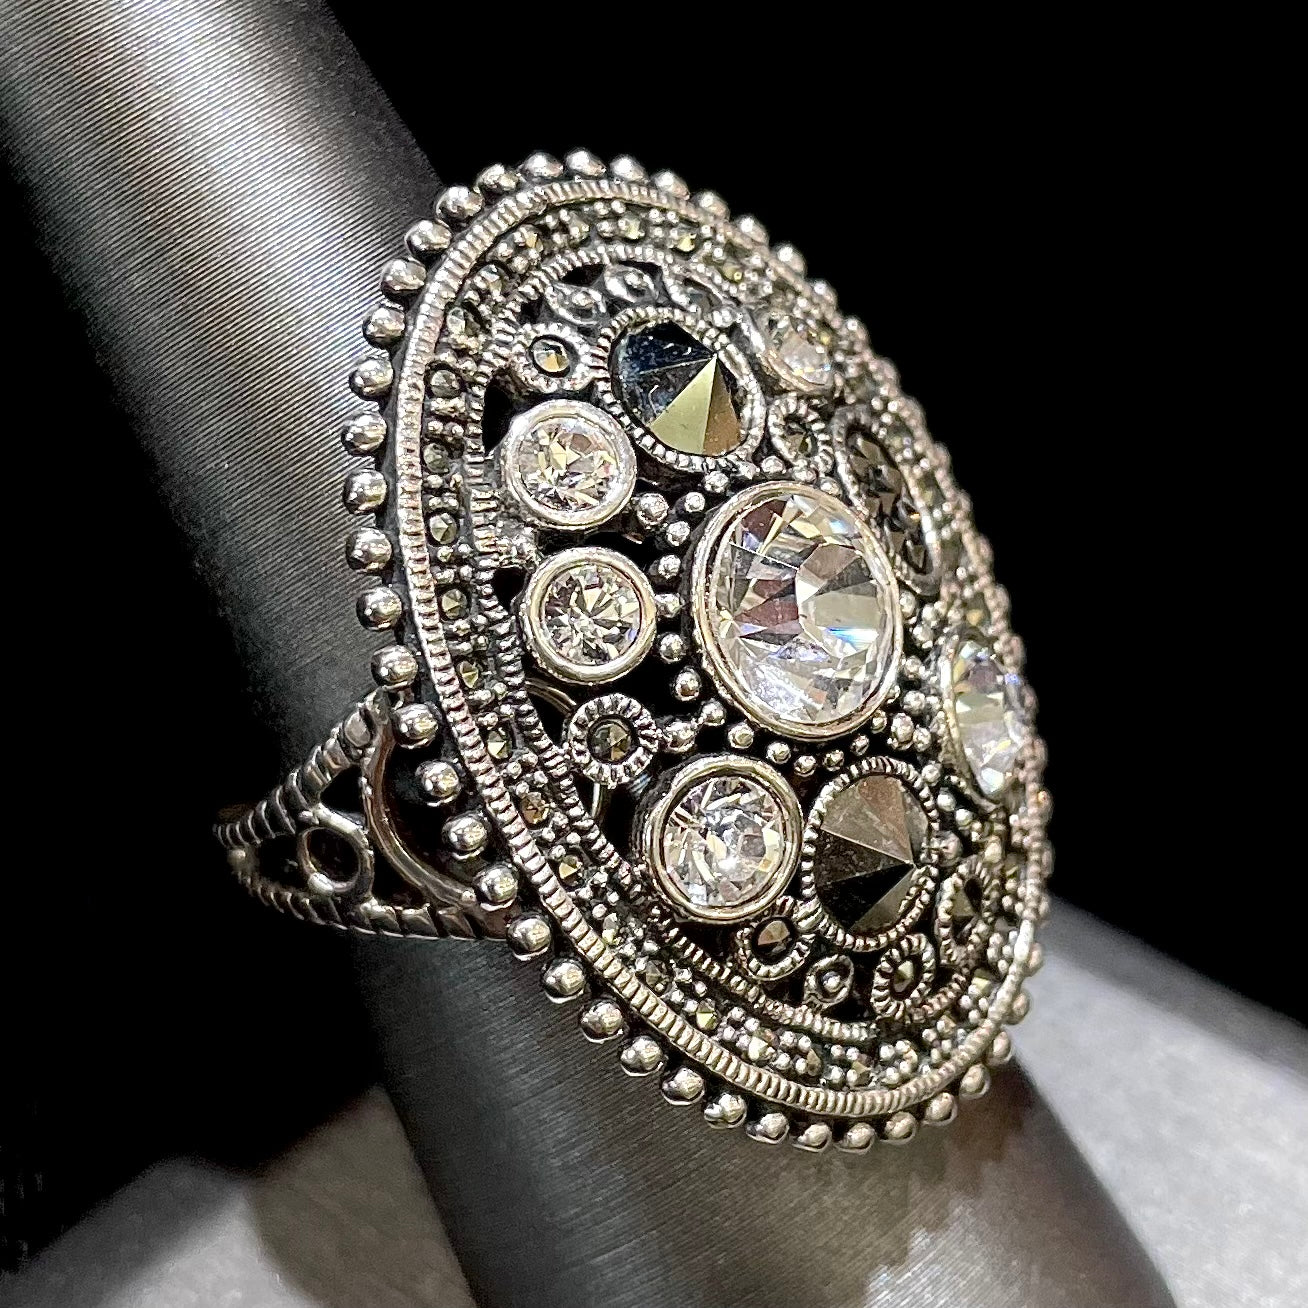 Silver Steam Punk style gear ring set with marcasite and round faceted glass stones.